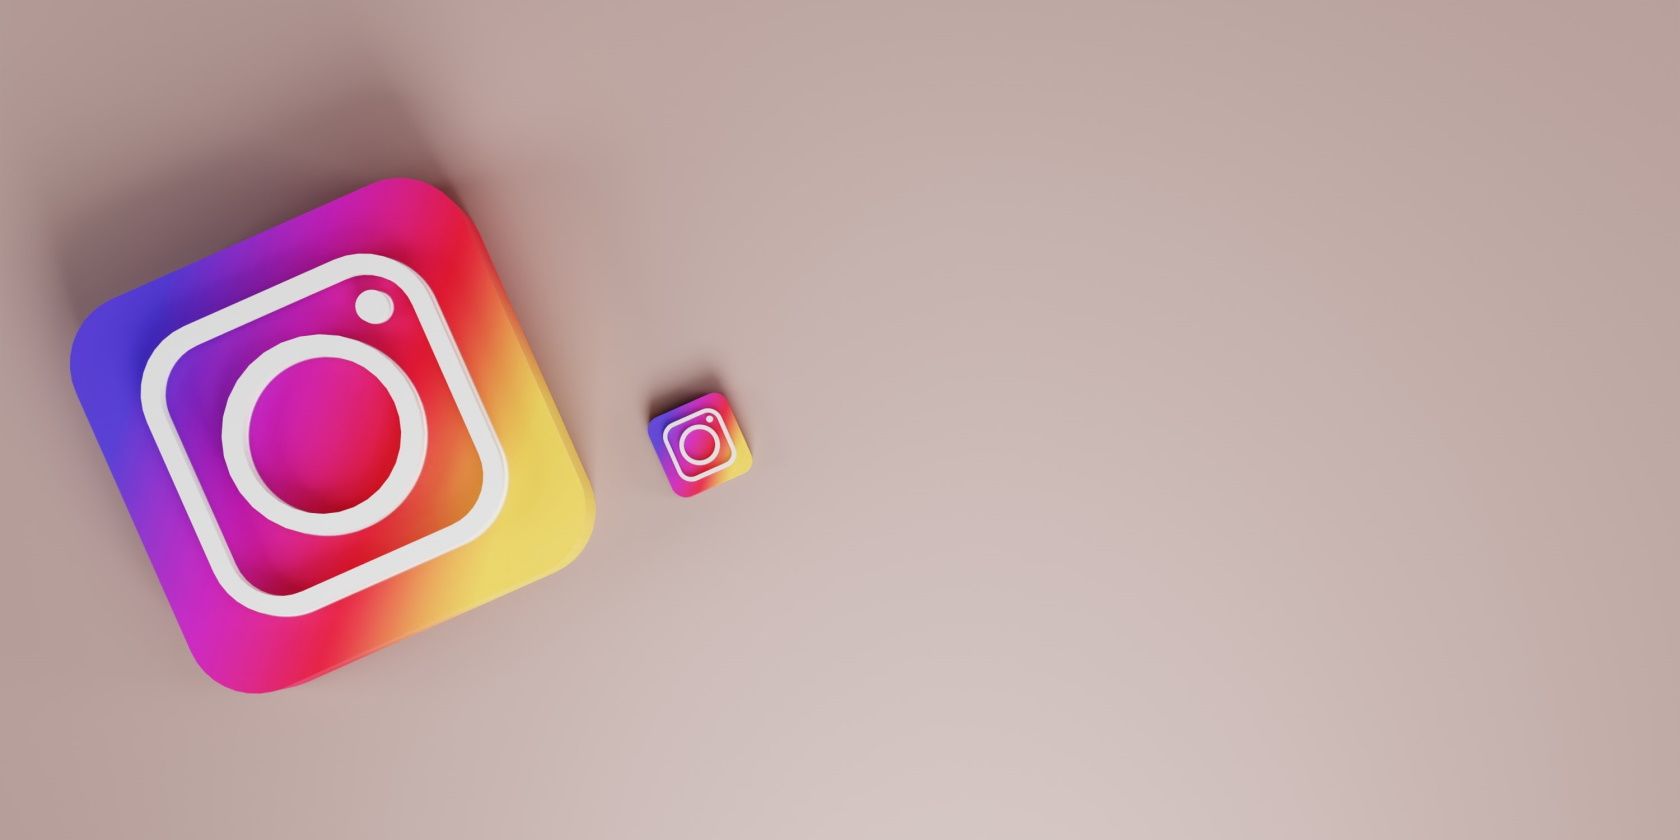 one large and one tiny 3D Instagram logos